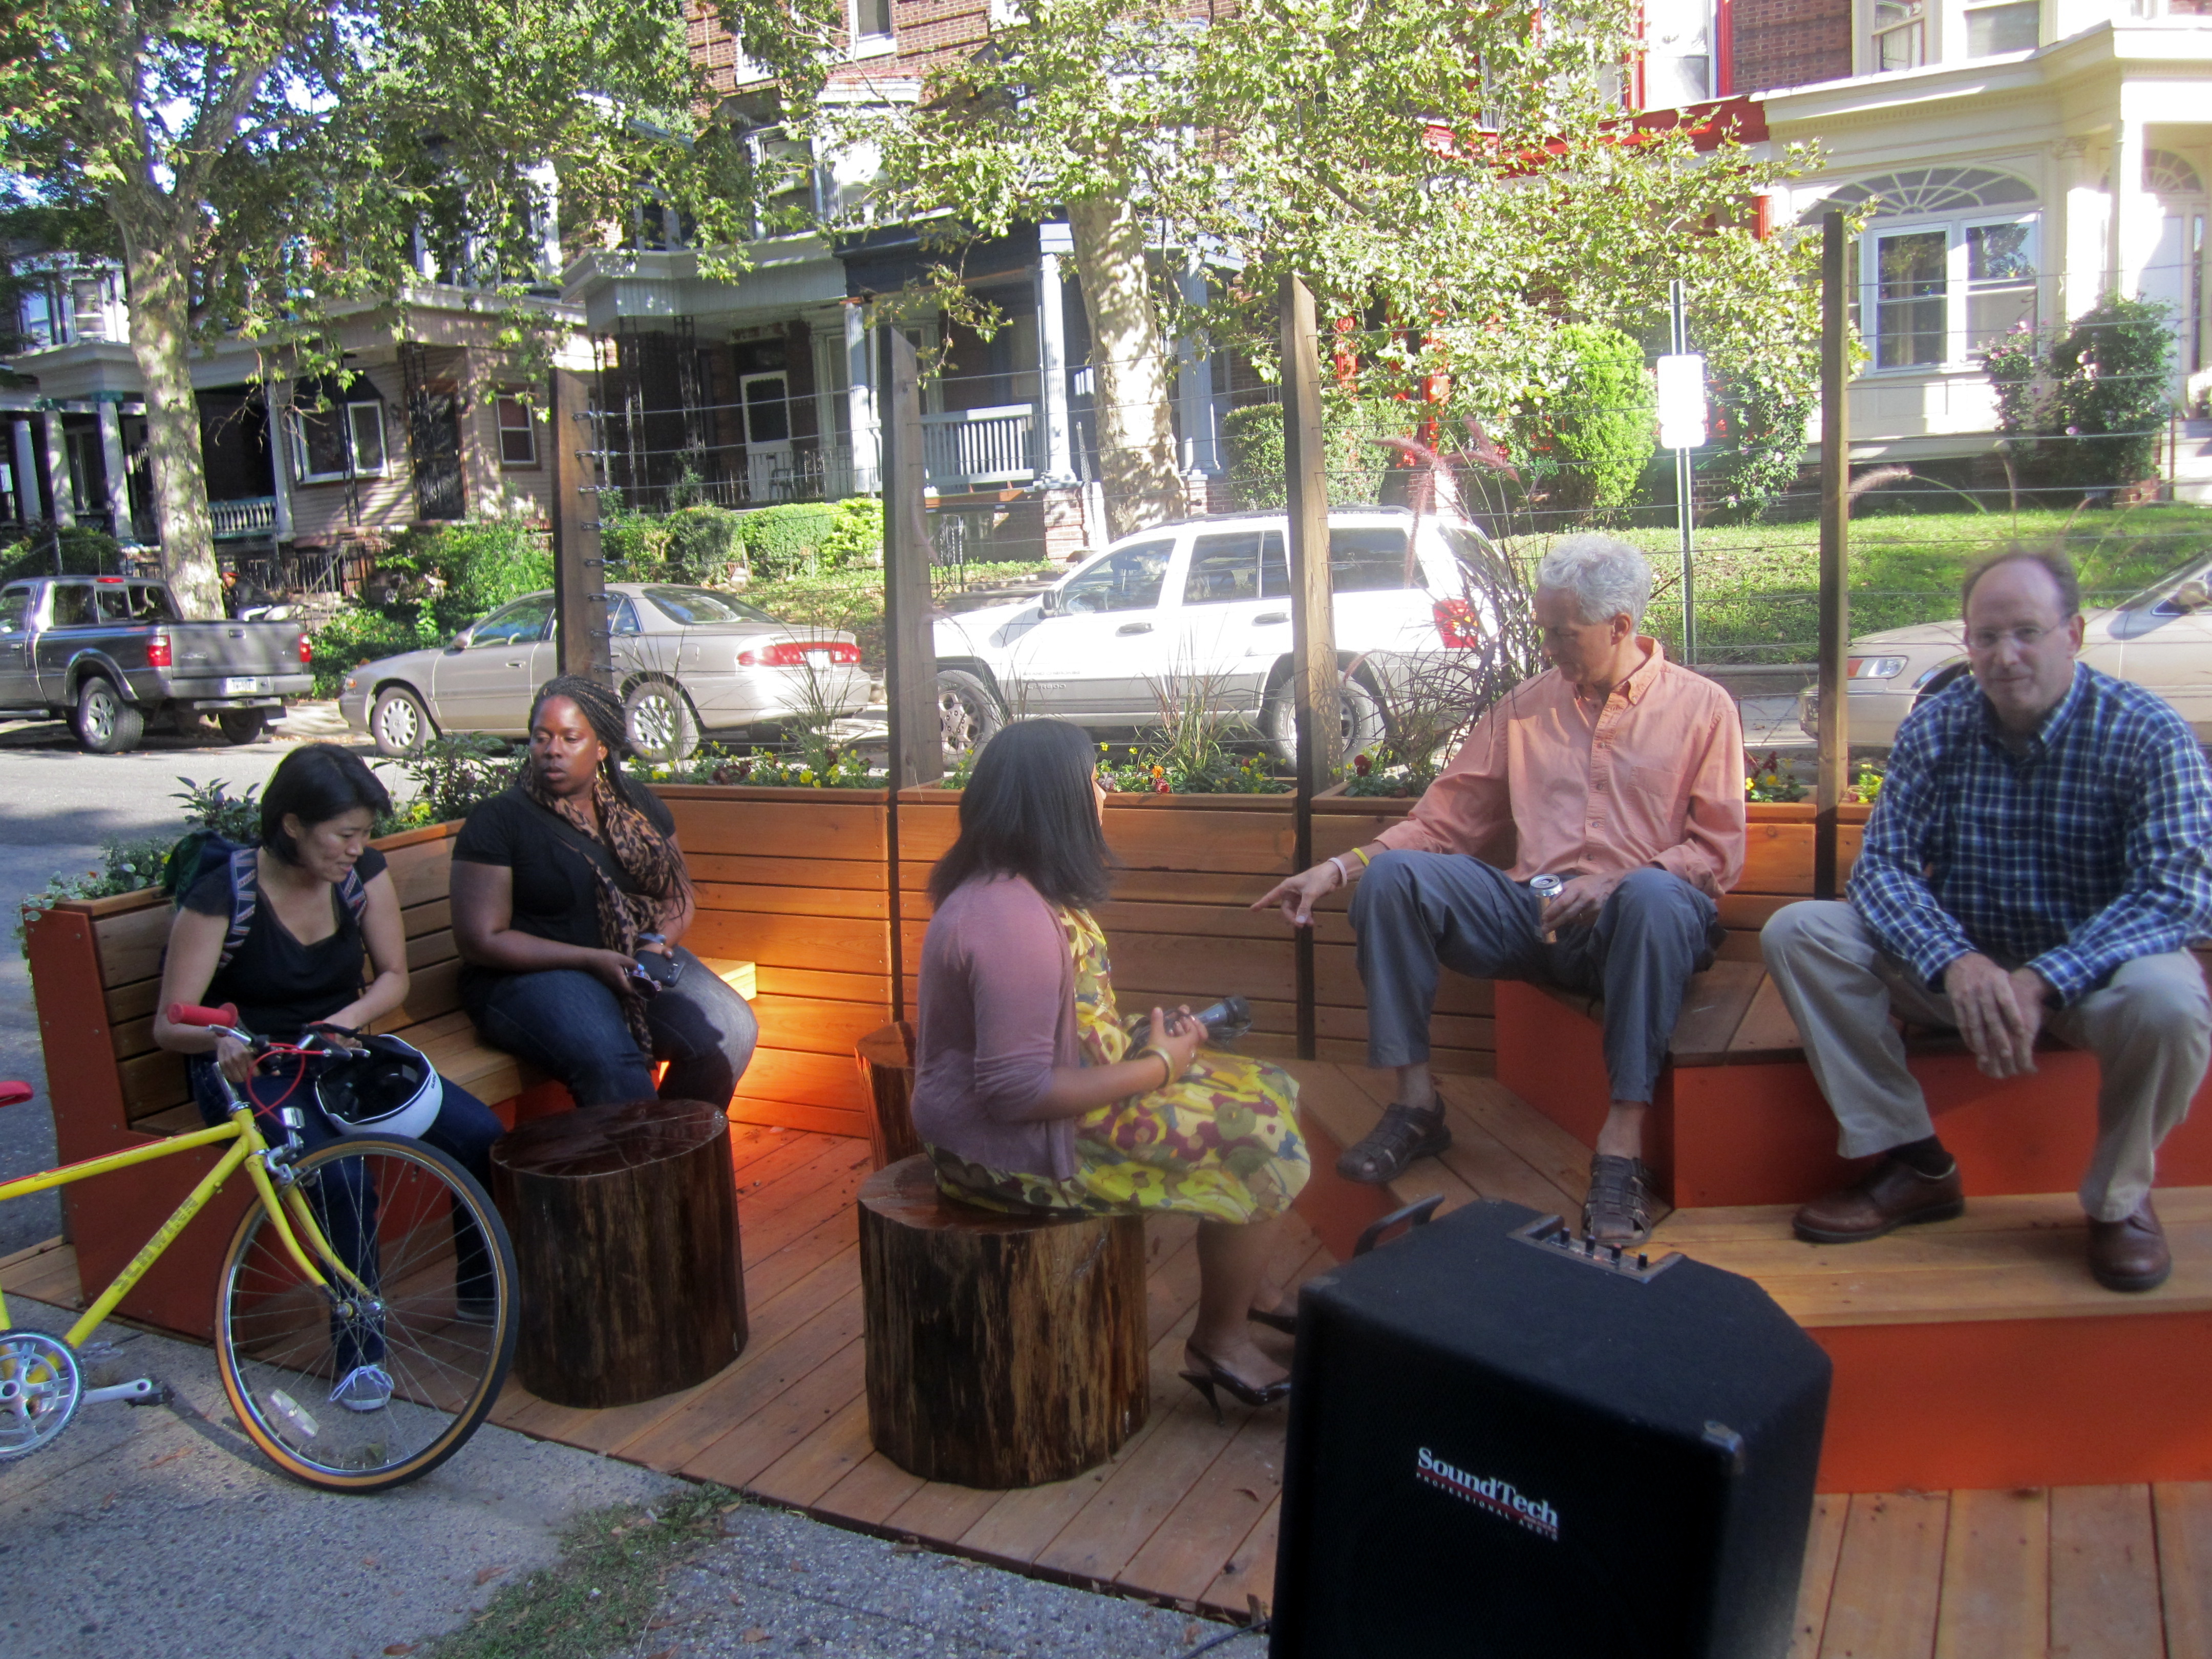 Some of the Logan parklet's first visitors used the various seating options in the lounge area.